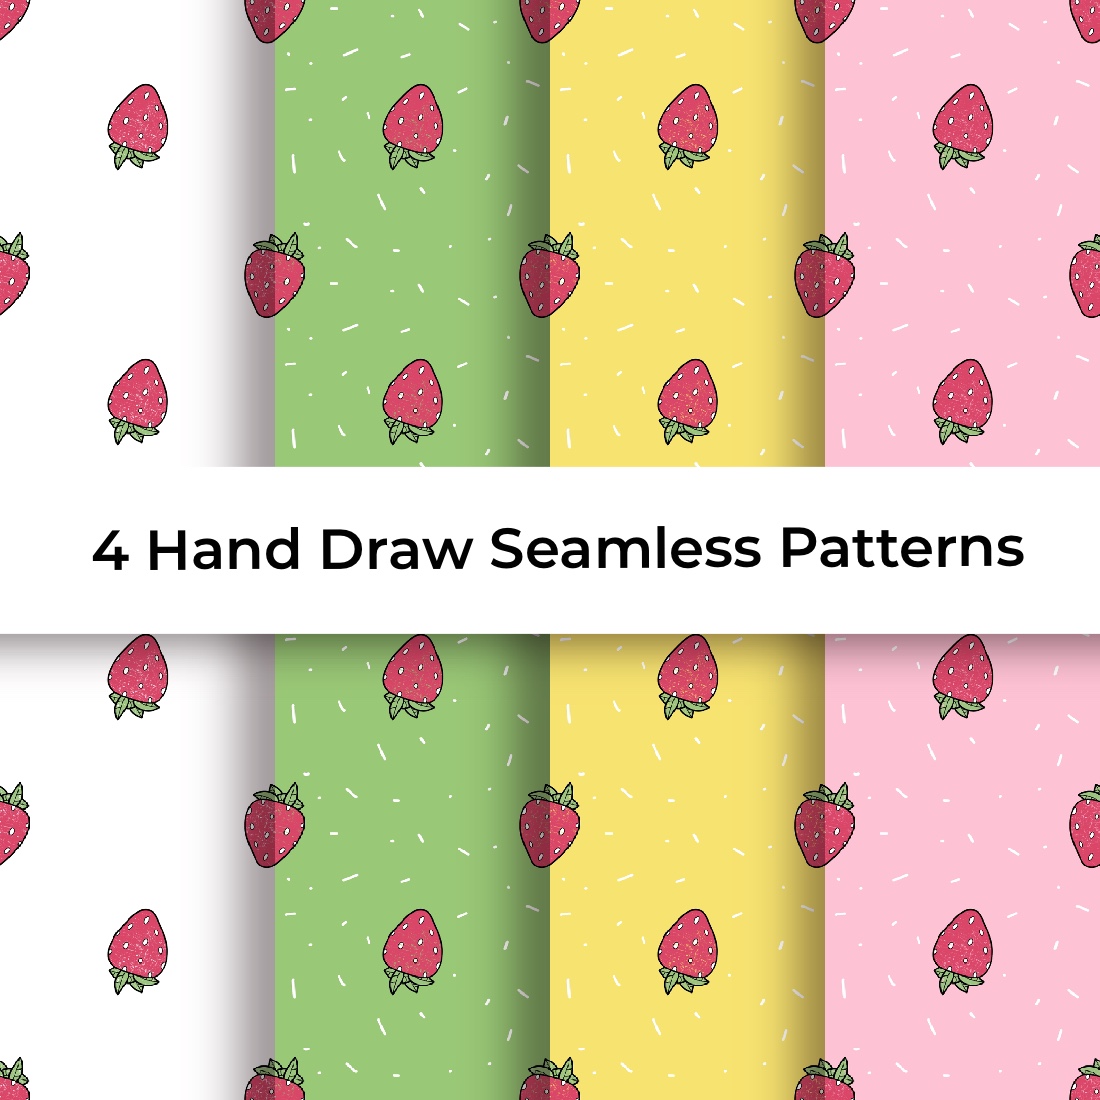 Seamless Berries Patterns cover image.